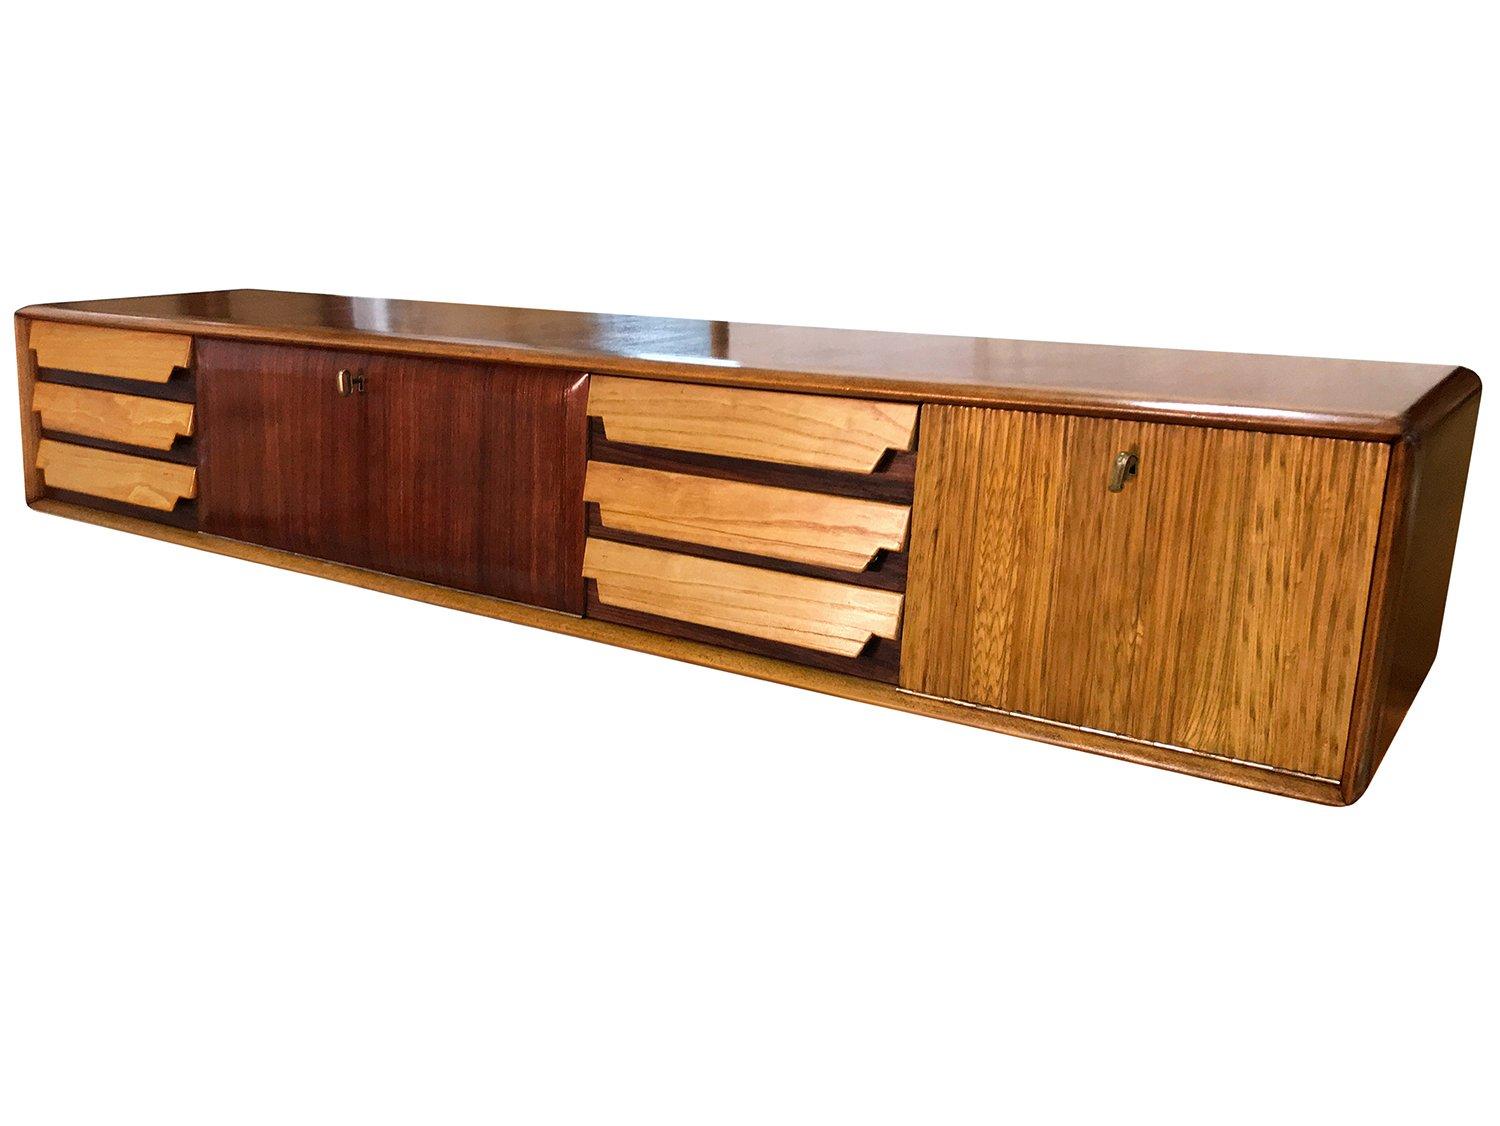 This stunning and very rare Italian wall-mounted Sideboard is a very unique piece of midcentury Italian design.

It was originally part of a wall unit designed by Gio Ponti, as showed in last image, and manufactured by Vittorio Dassi in the